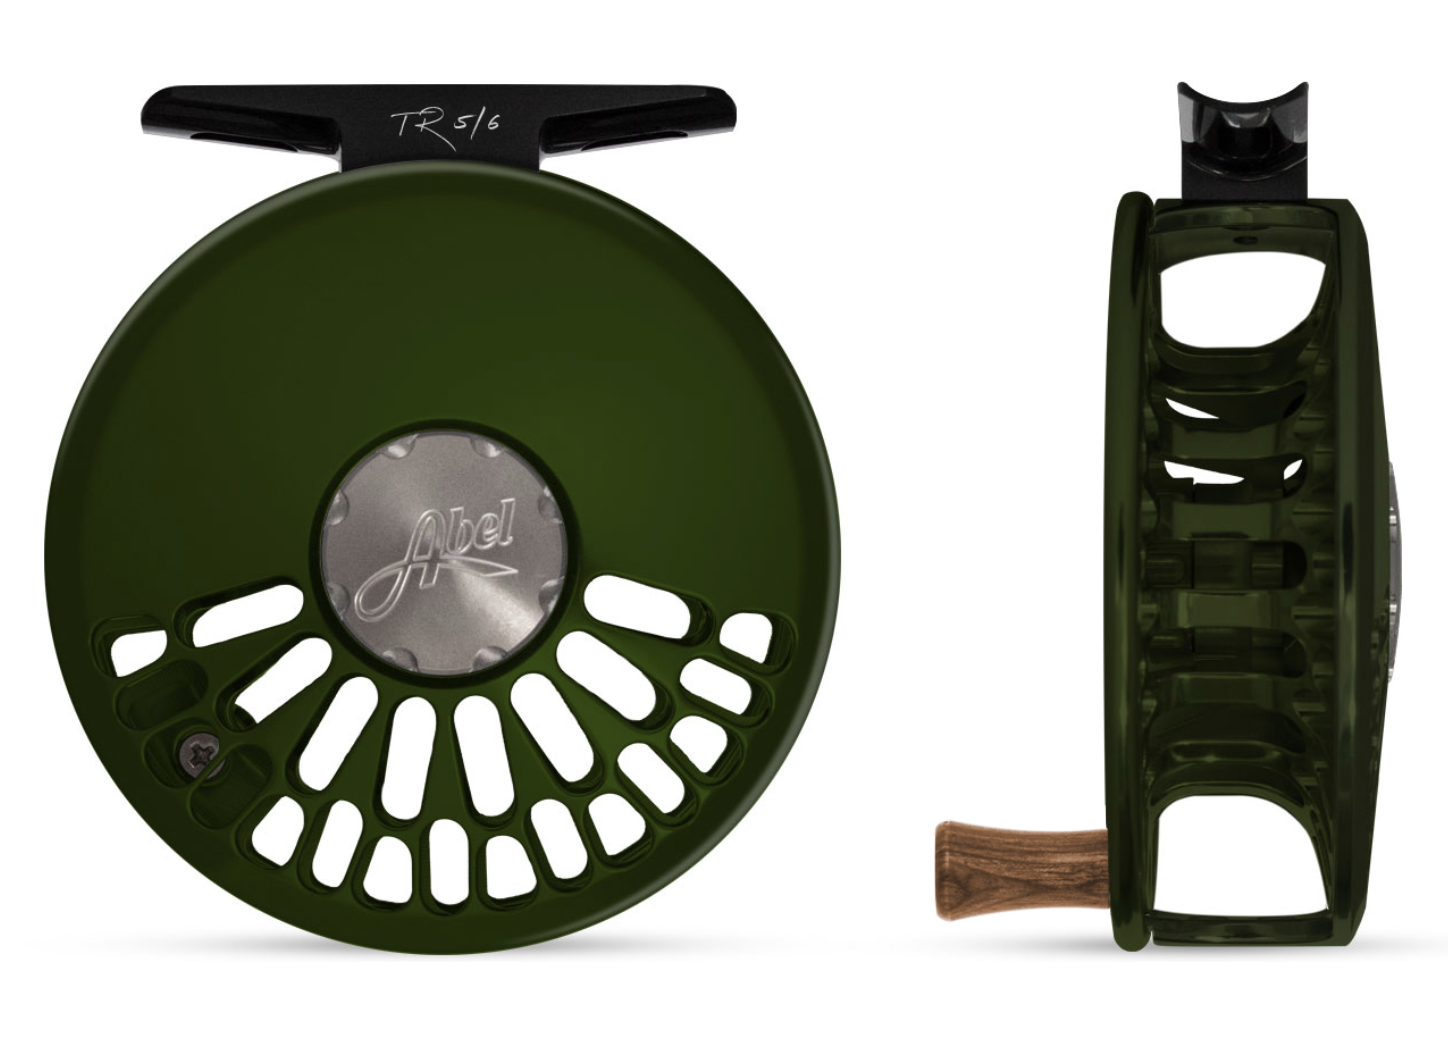 Abel TR "Deep Green" Fly Reel in 5/6wt - In Stock! Great match with Winston rods